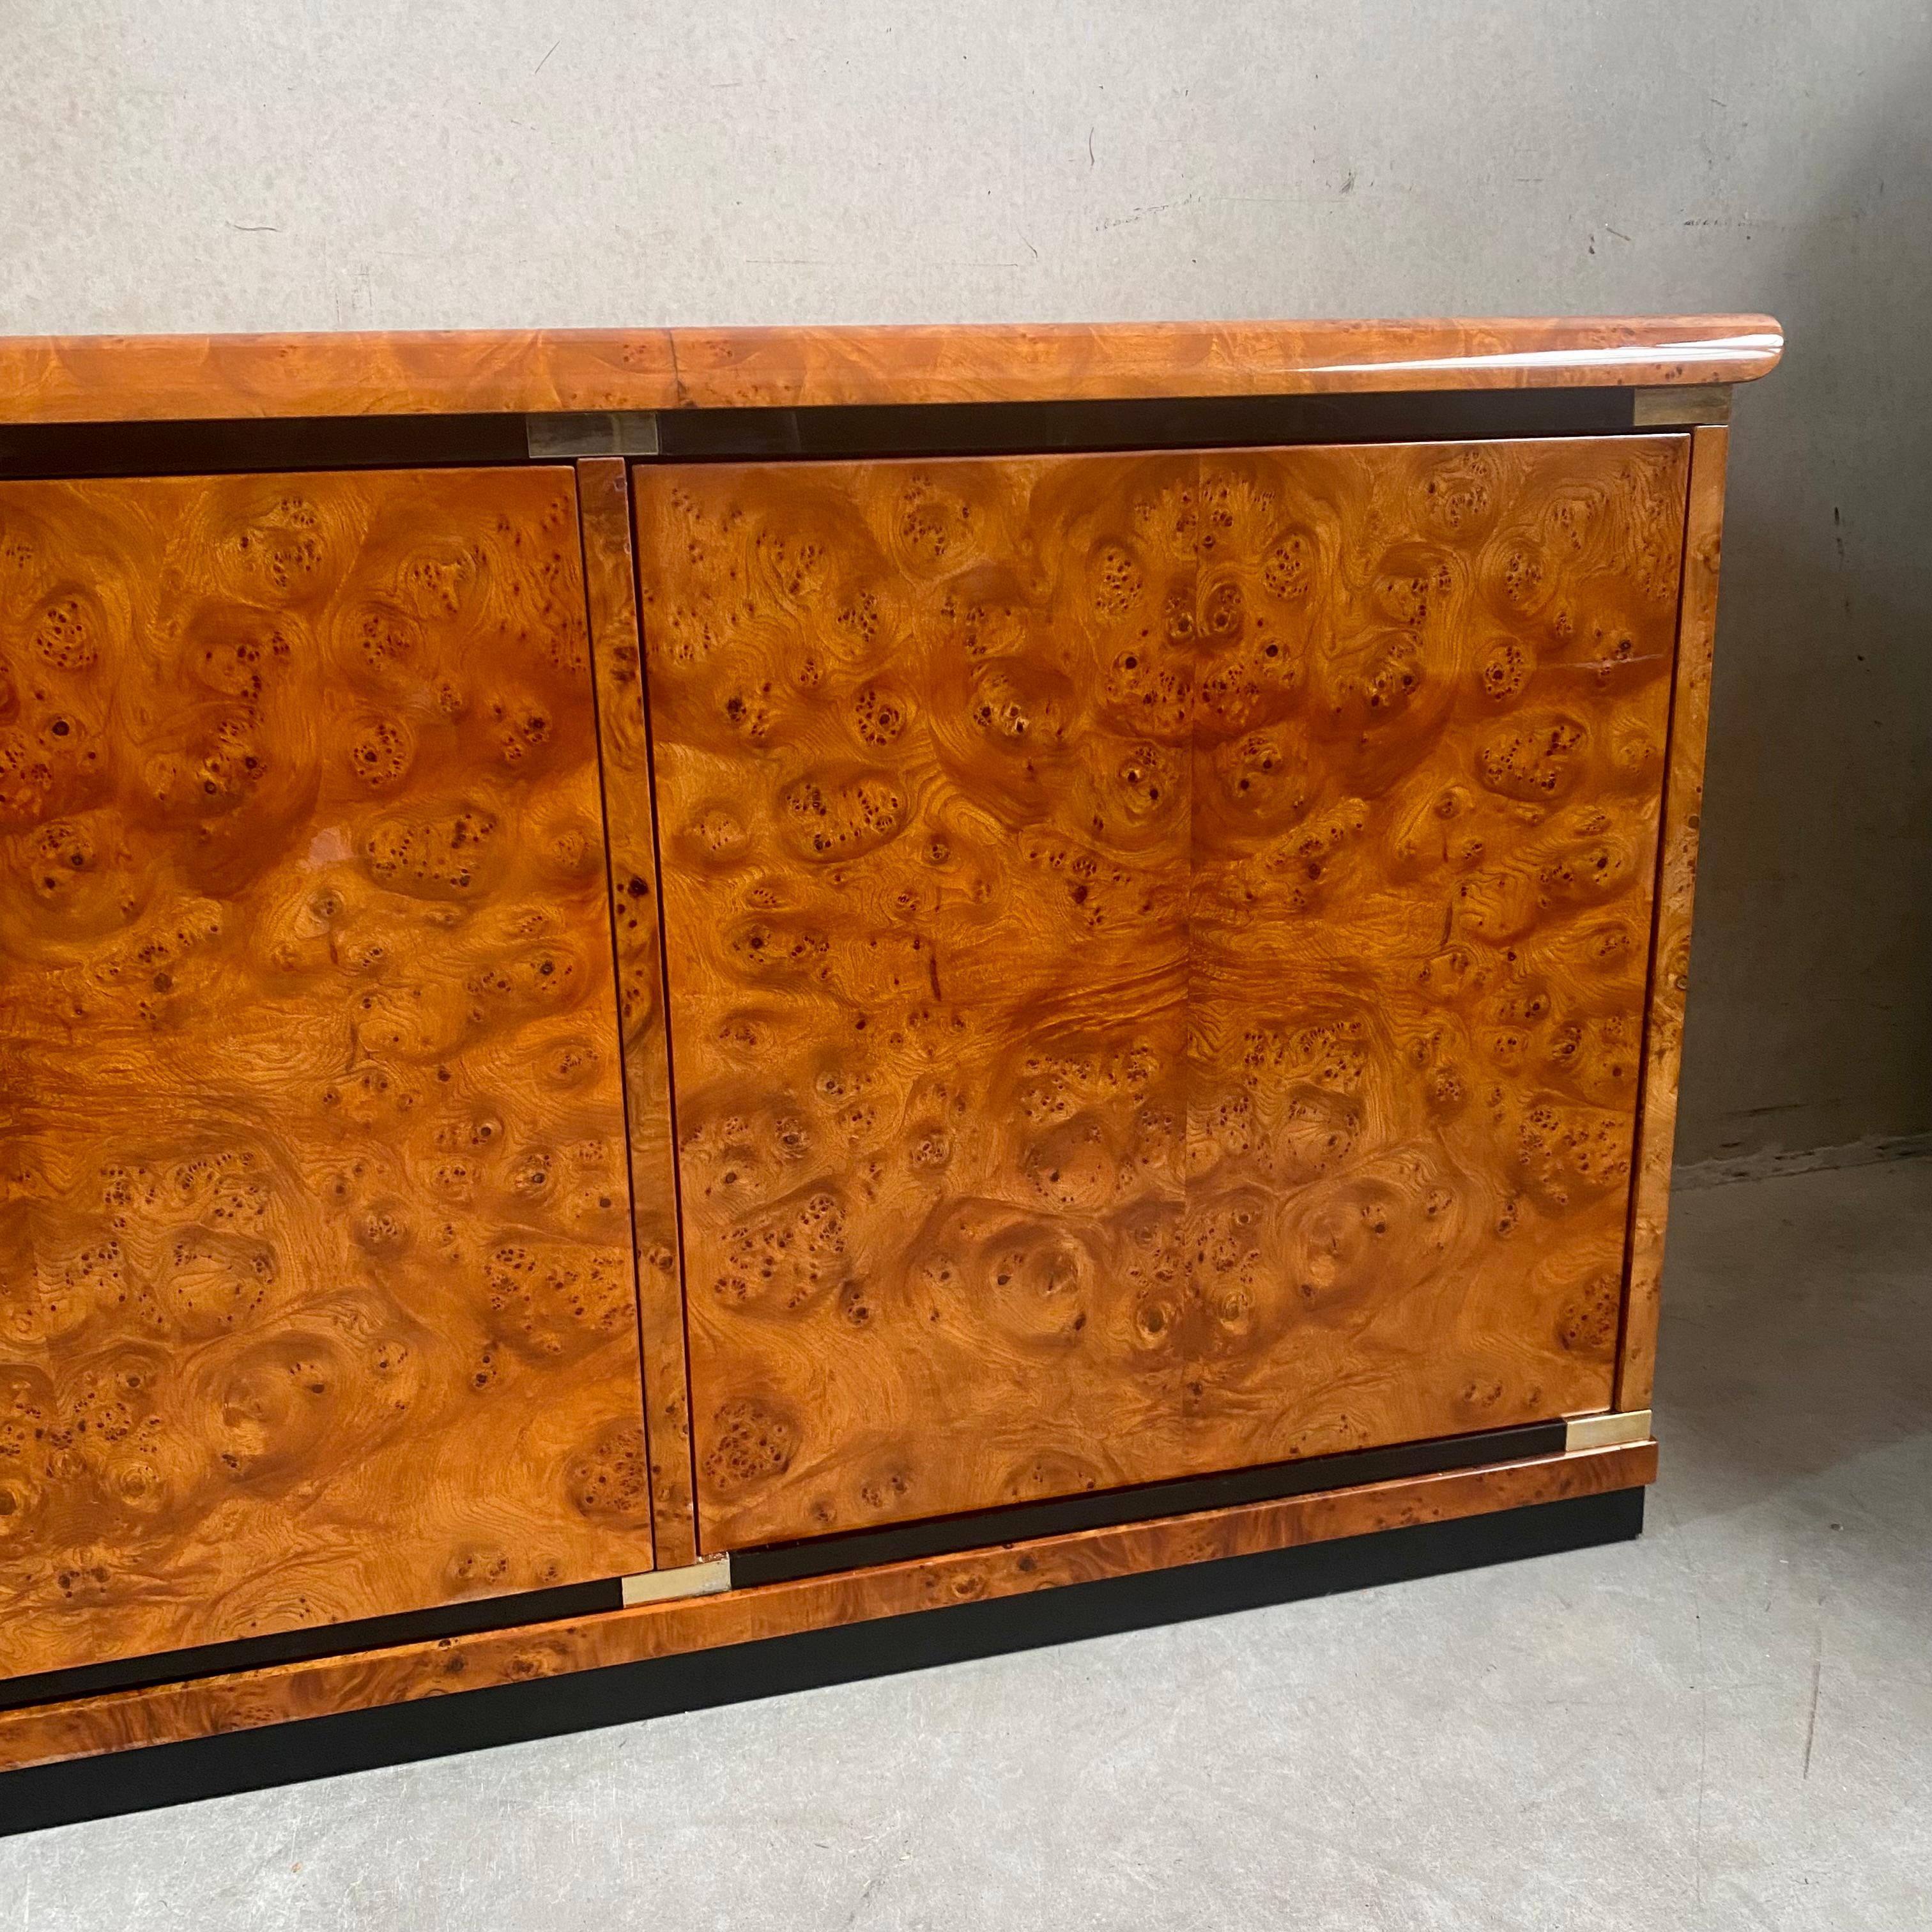 Briar Burl Wood Sideboard by Guerini Emilio for Gdm 24 Kt Gold Plated Italy 1980 For Sale 12